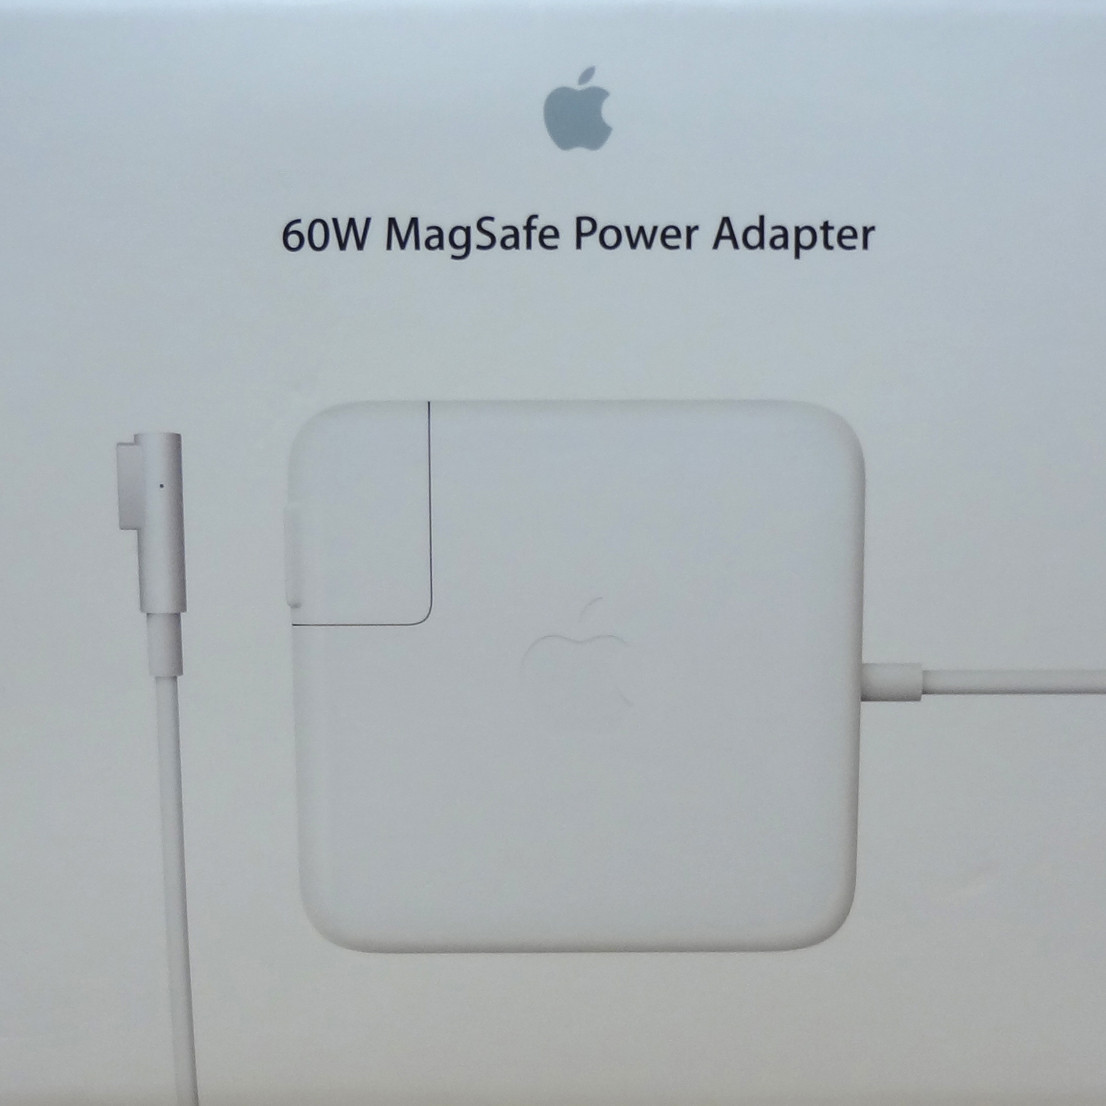 Lot 3 60W AC Power Adapter Charger For Macbook Pro 13" MA254LL/A MA700LL/A A1181 